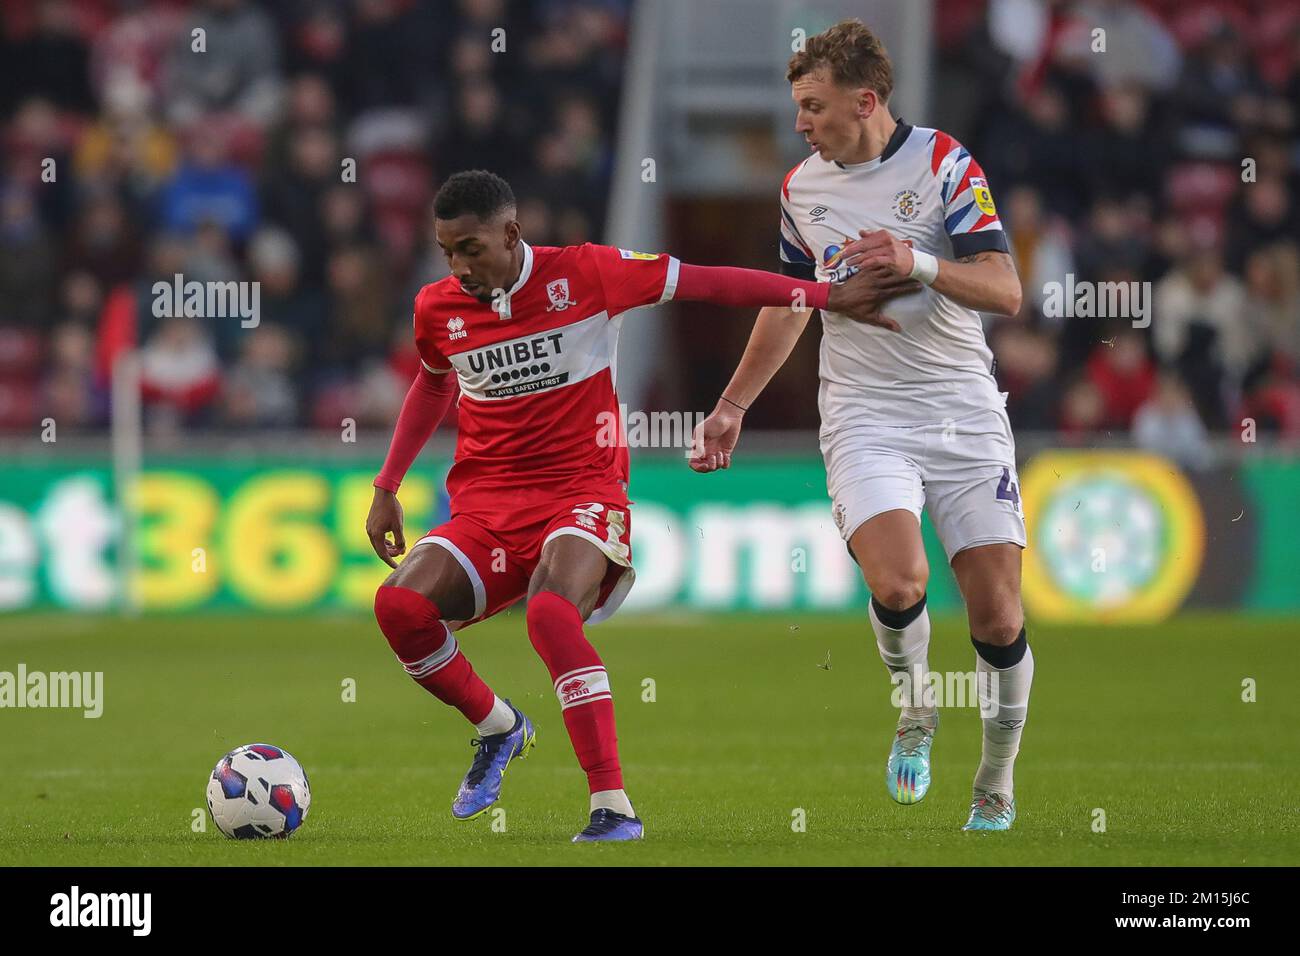 Isaiah Jones #2 of Middlesbrough holds off the challenge of Tom Lockyer #4 of Luton Town during the Sky Bet Championship match Middlesbrough vs Luton Town at Riverside Stadium, Middlesbrough, United Kingdom, 10th December 2022  (Photo by James Heaton/News Images) Stock Photo